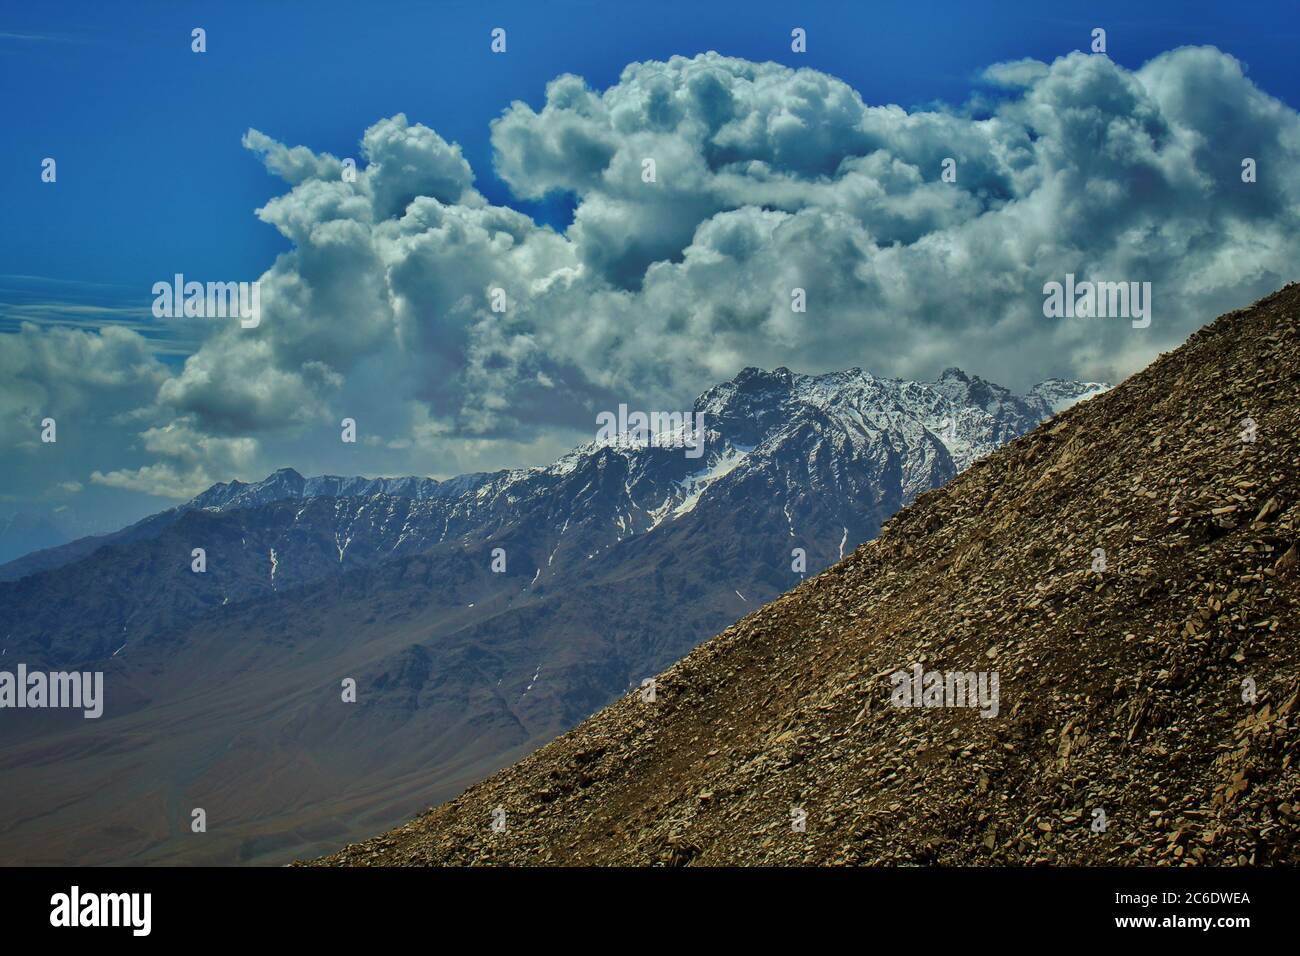 scenic view of a mountains with a blue sky and clouds above. Stock Photo